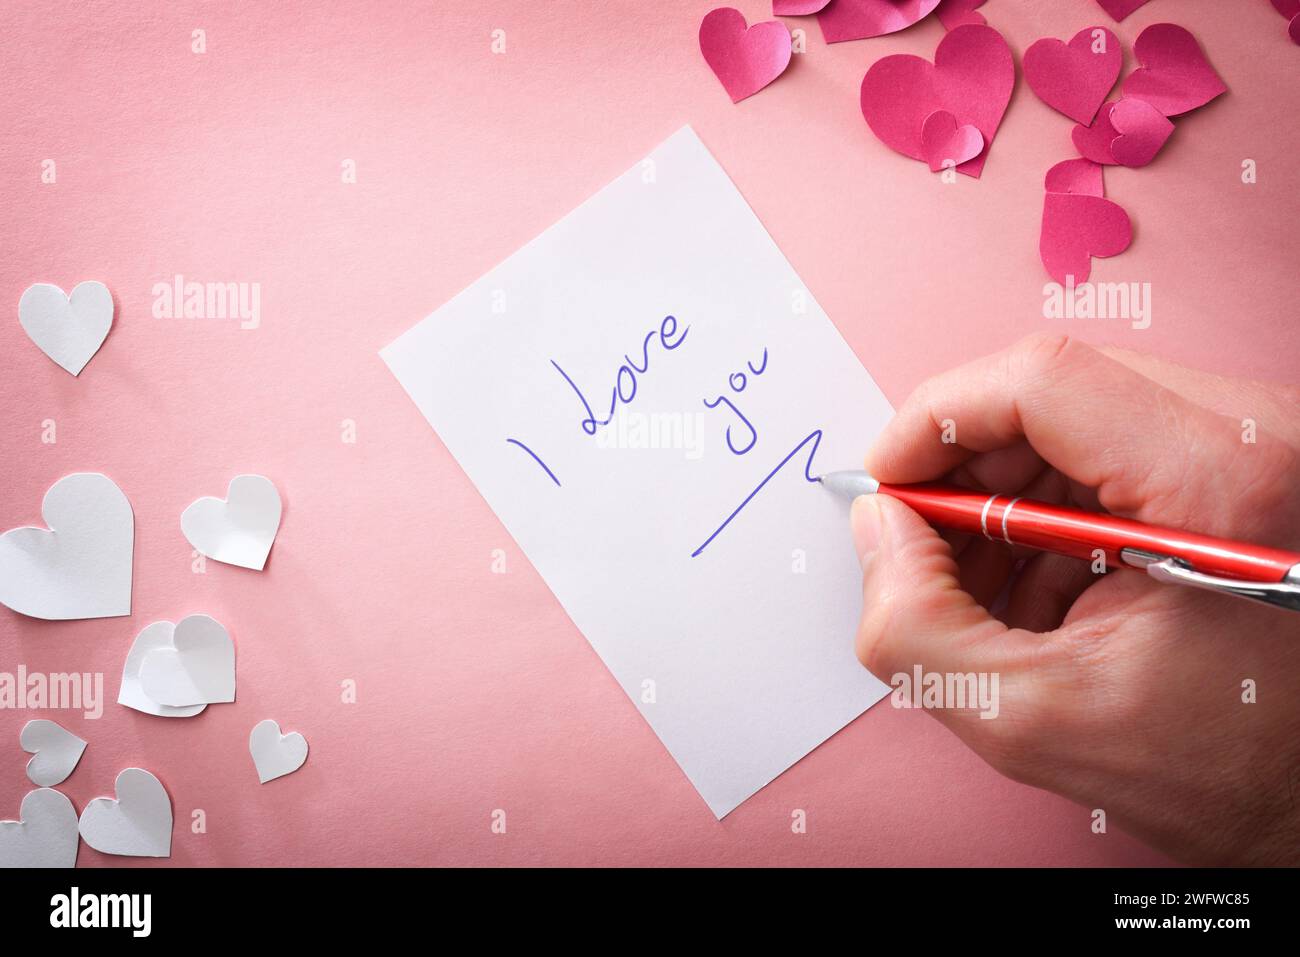 Hand writing I love you on white sheet on pink background with pink and white paper heart cutouts. Top view. Stock Photo